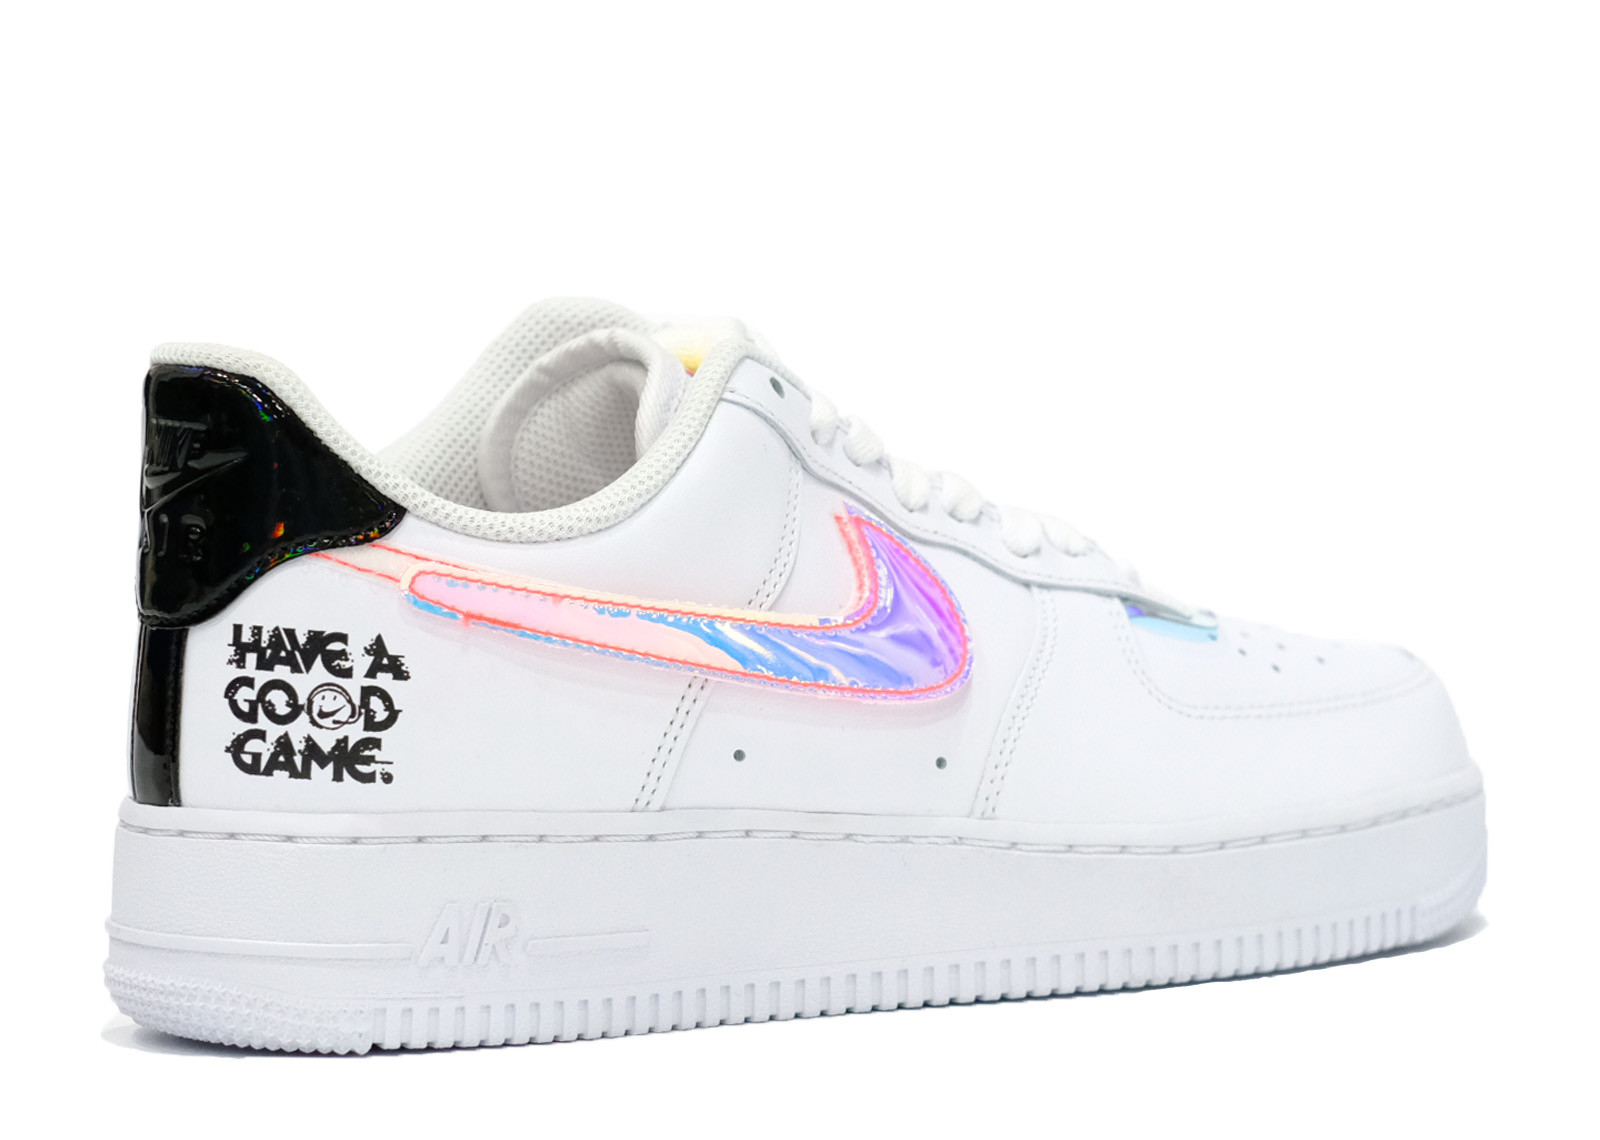 Nike Air Force 1 HAVE A GOOD GAME image 2